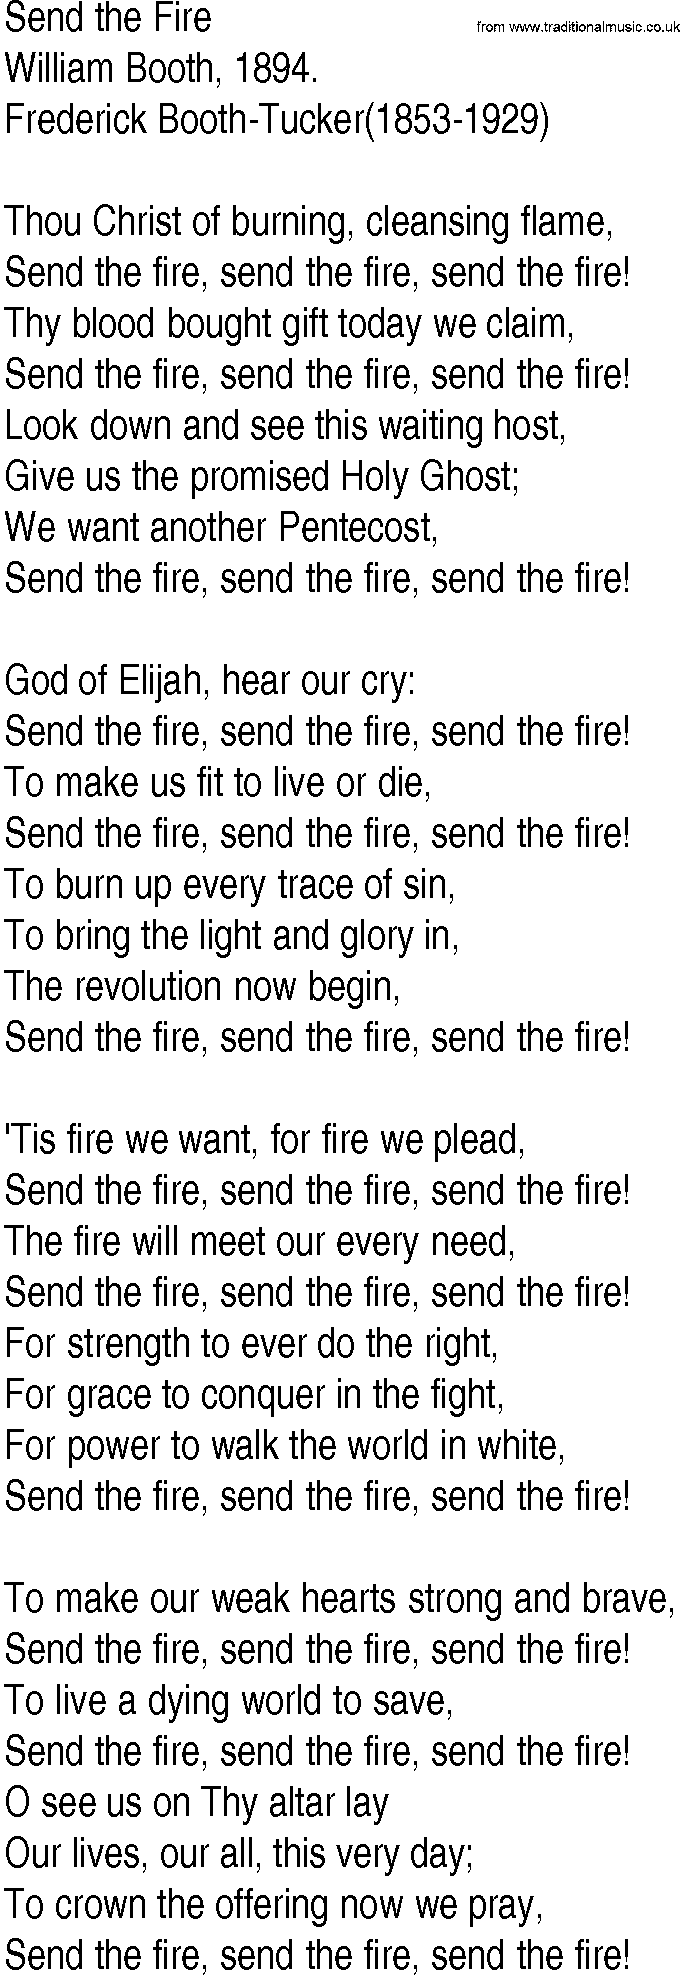 Hymn and Gospel Song: Send the Fire by William Booth lyrics